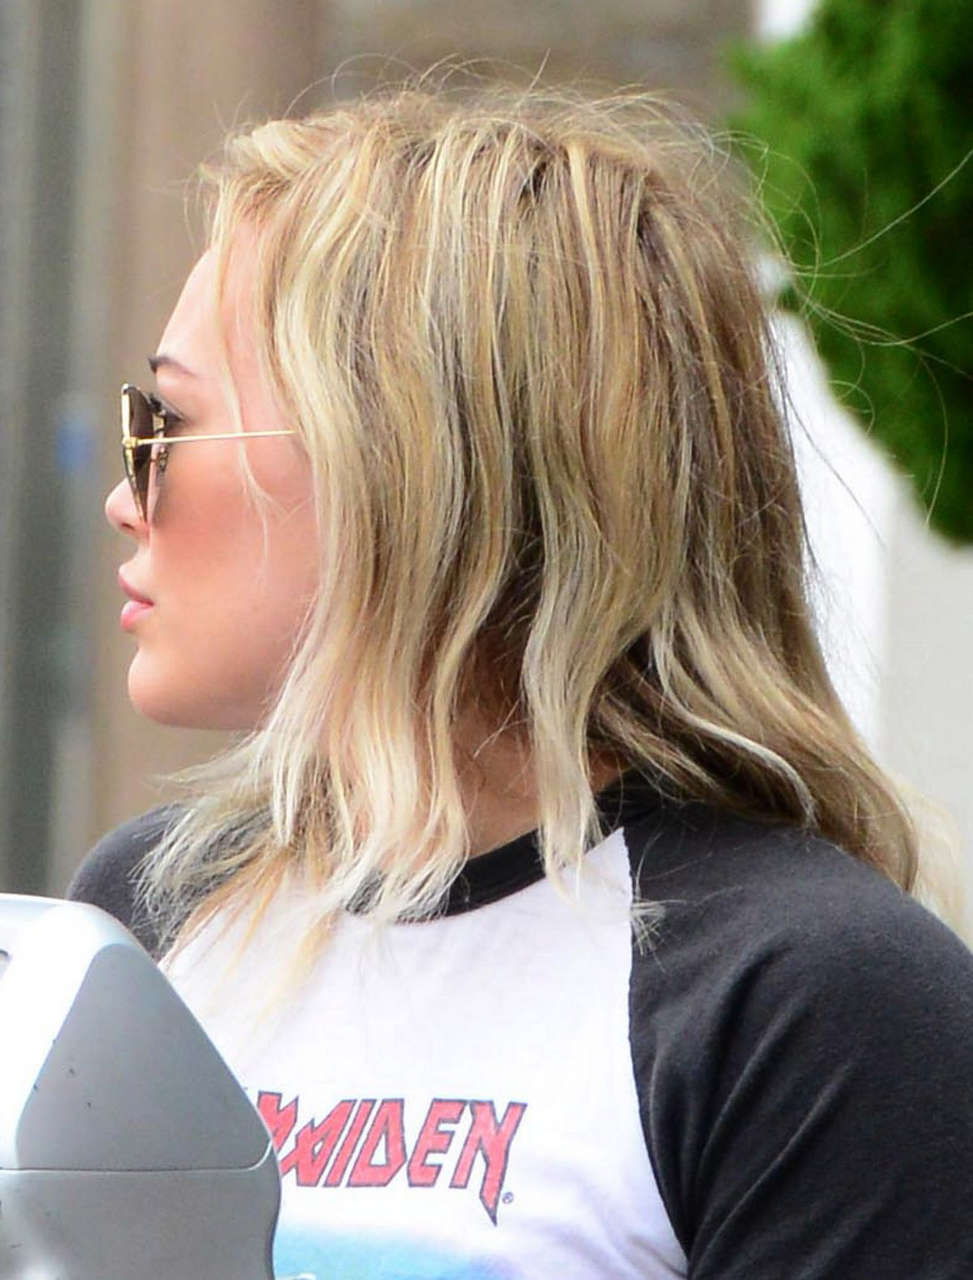 Hlary Duff Tight Jeans Out Beverly Hills